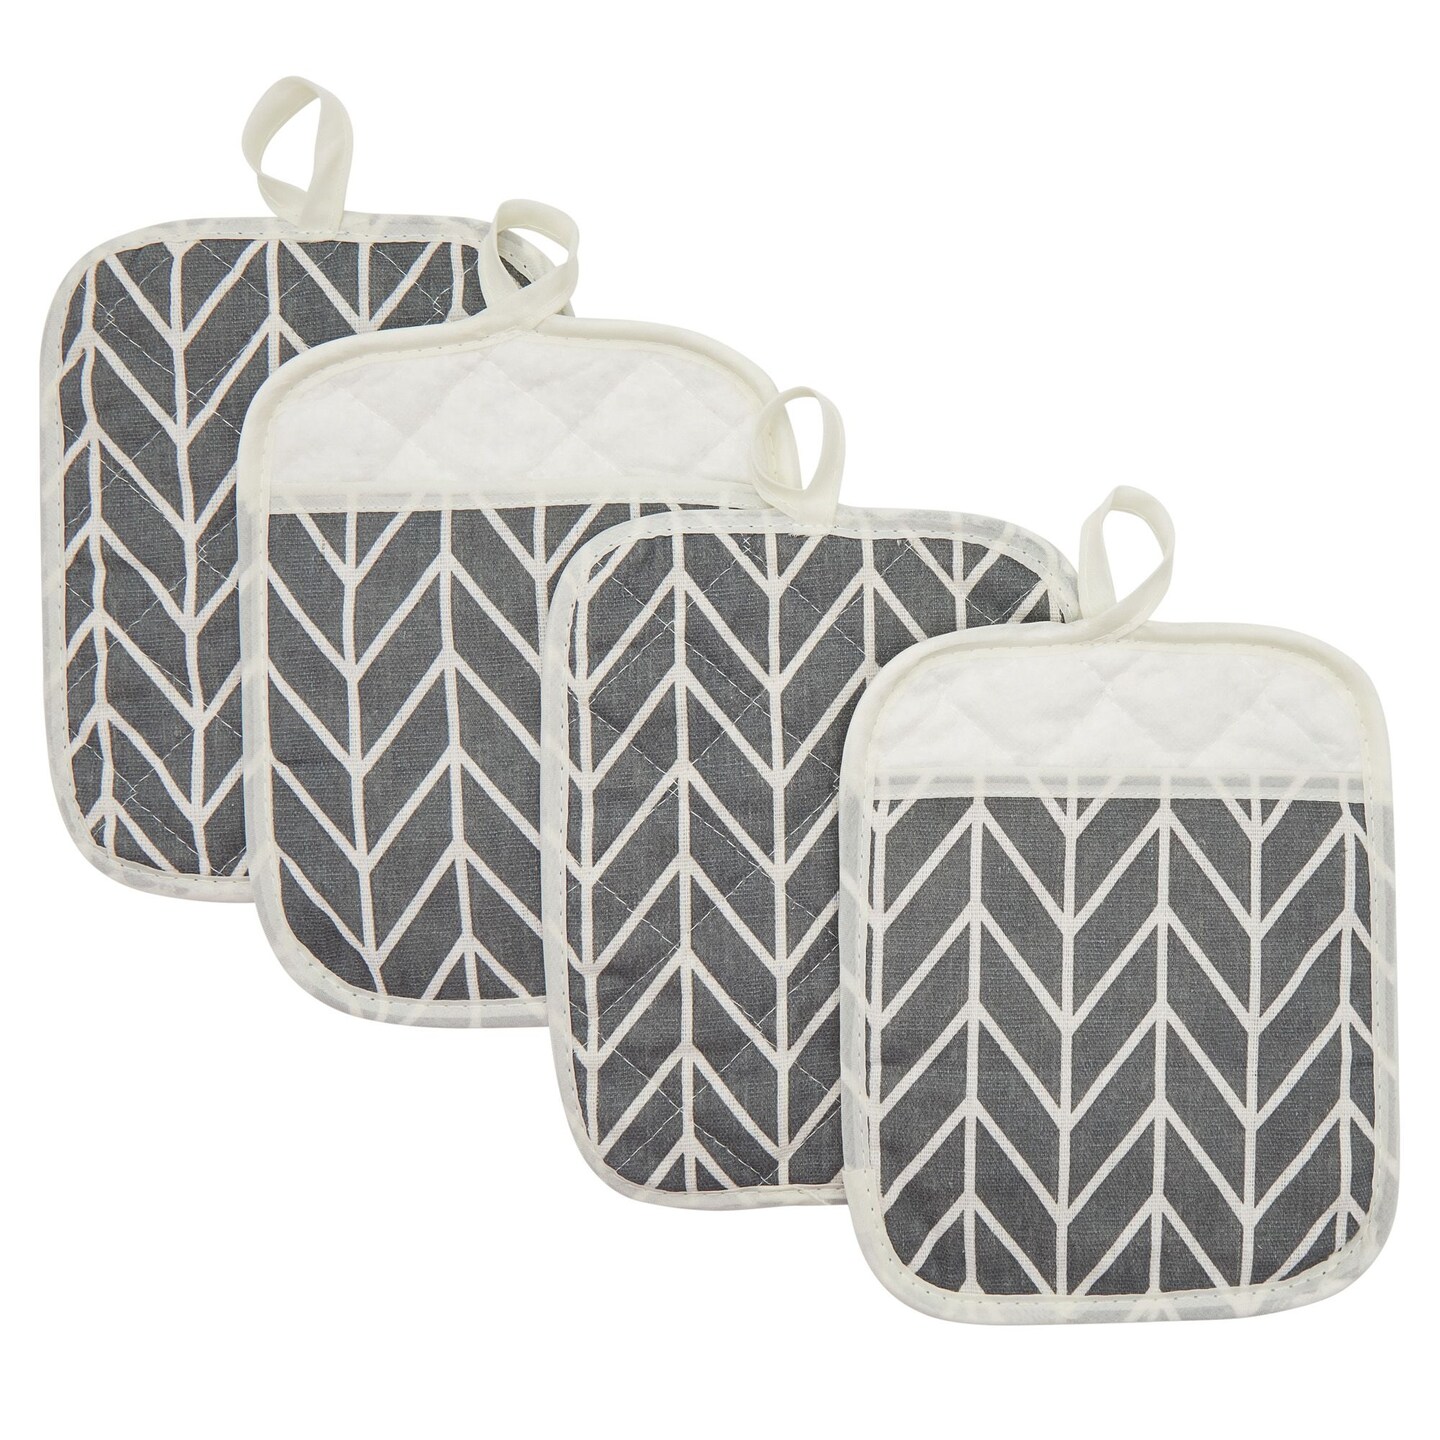 4 Pack Gray Hot Pads, Oven Pot Holders for Farmhouse Kitchen Decor